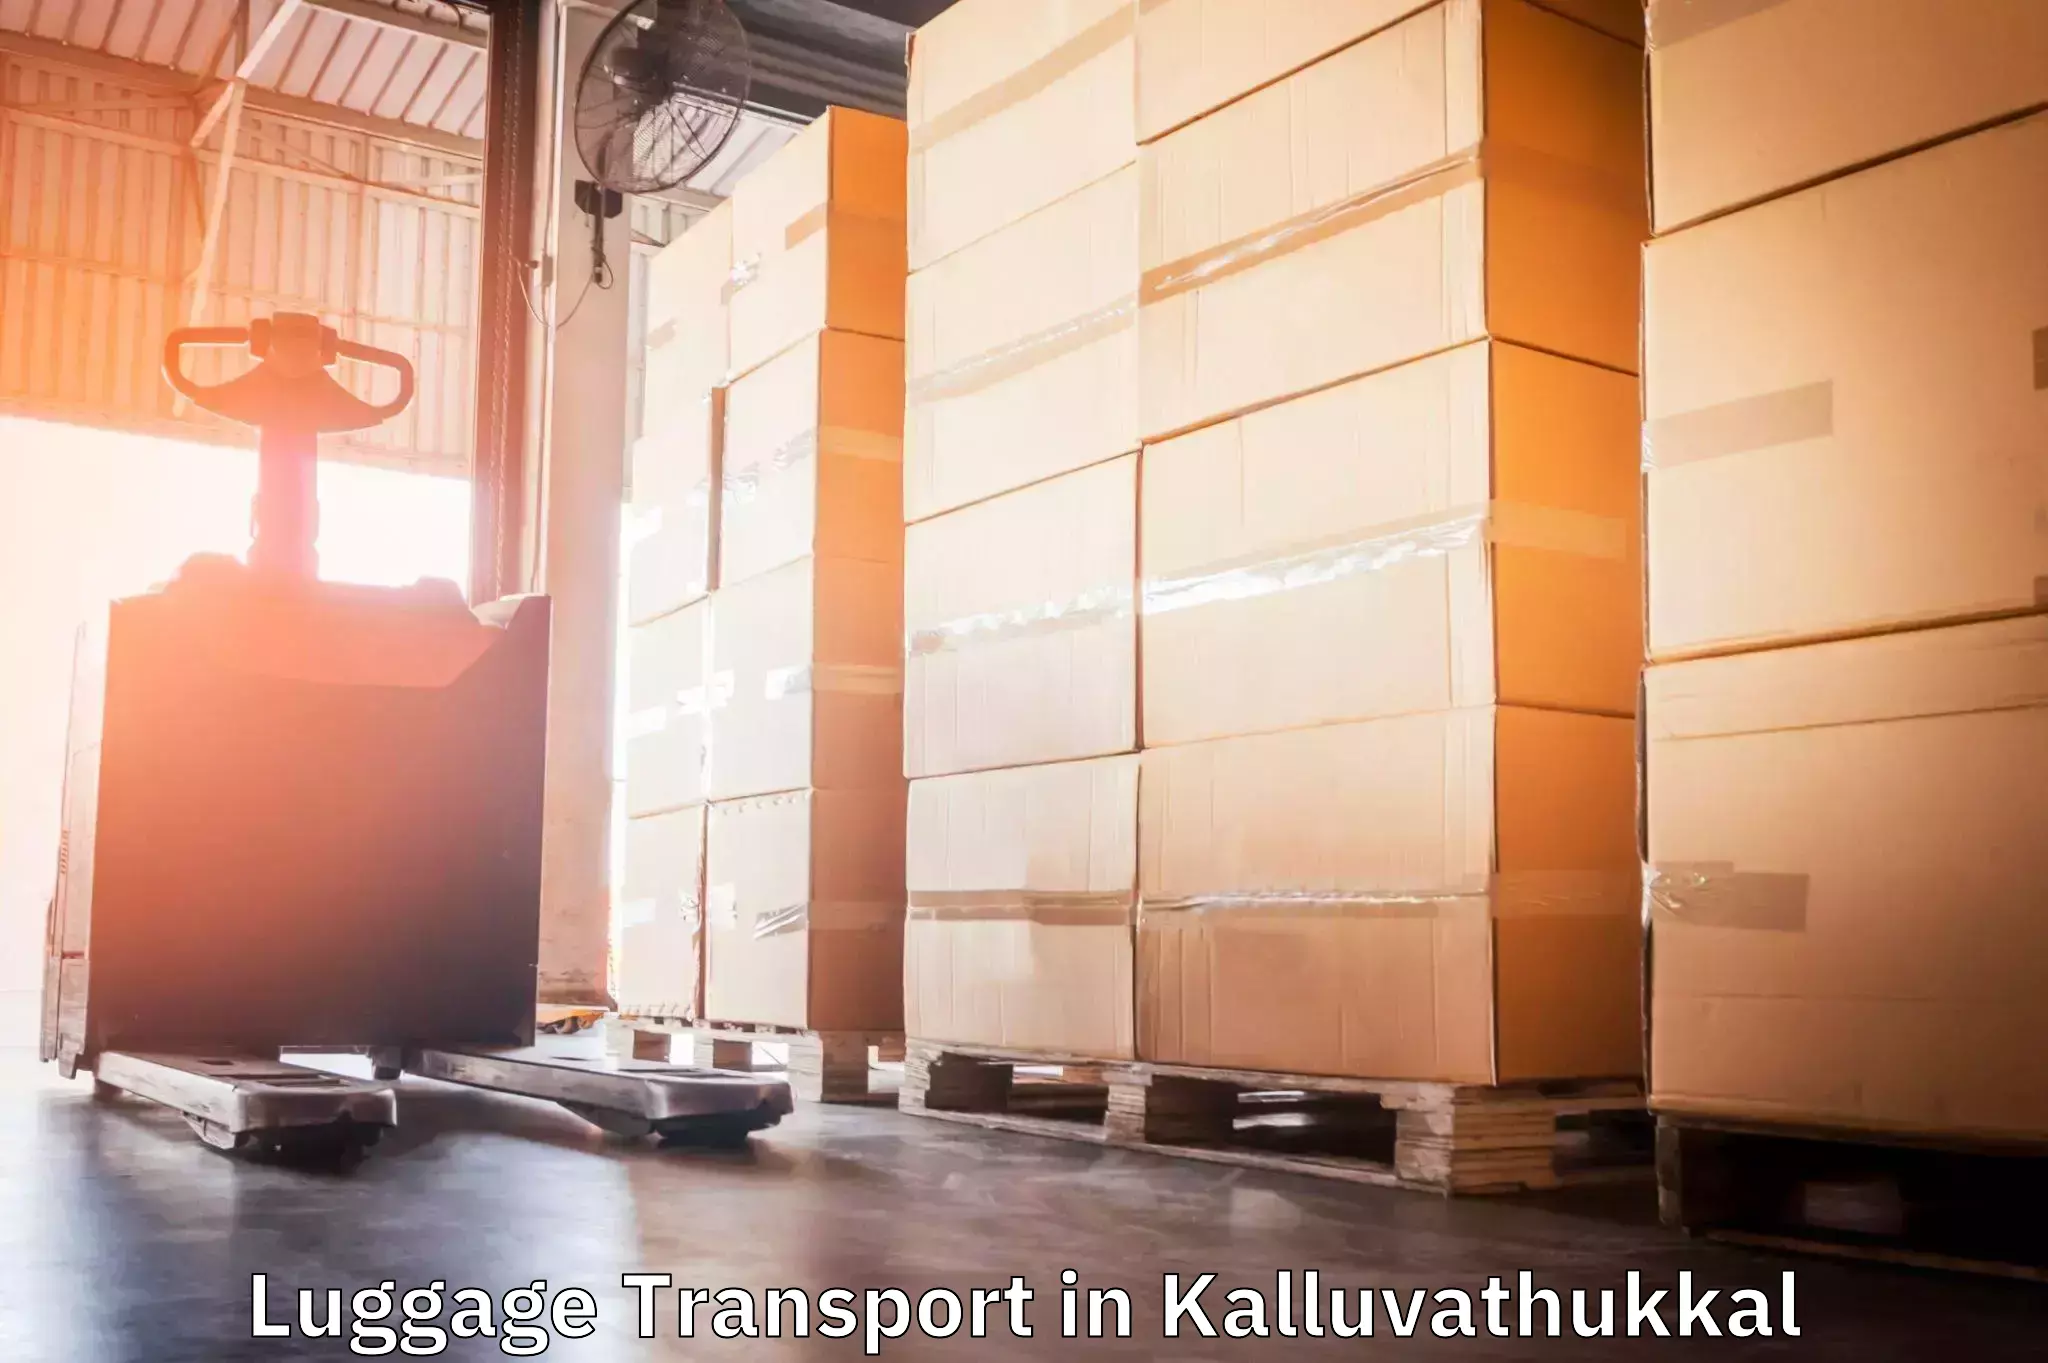 Luggage shipping trends in Kalluvathukkal